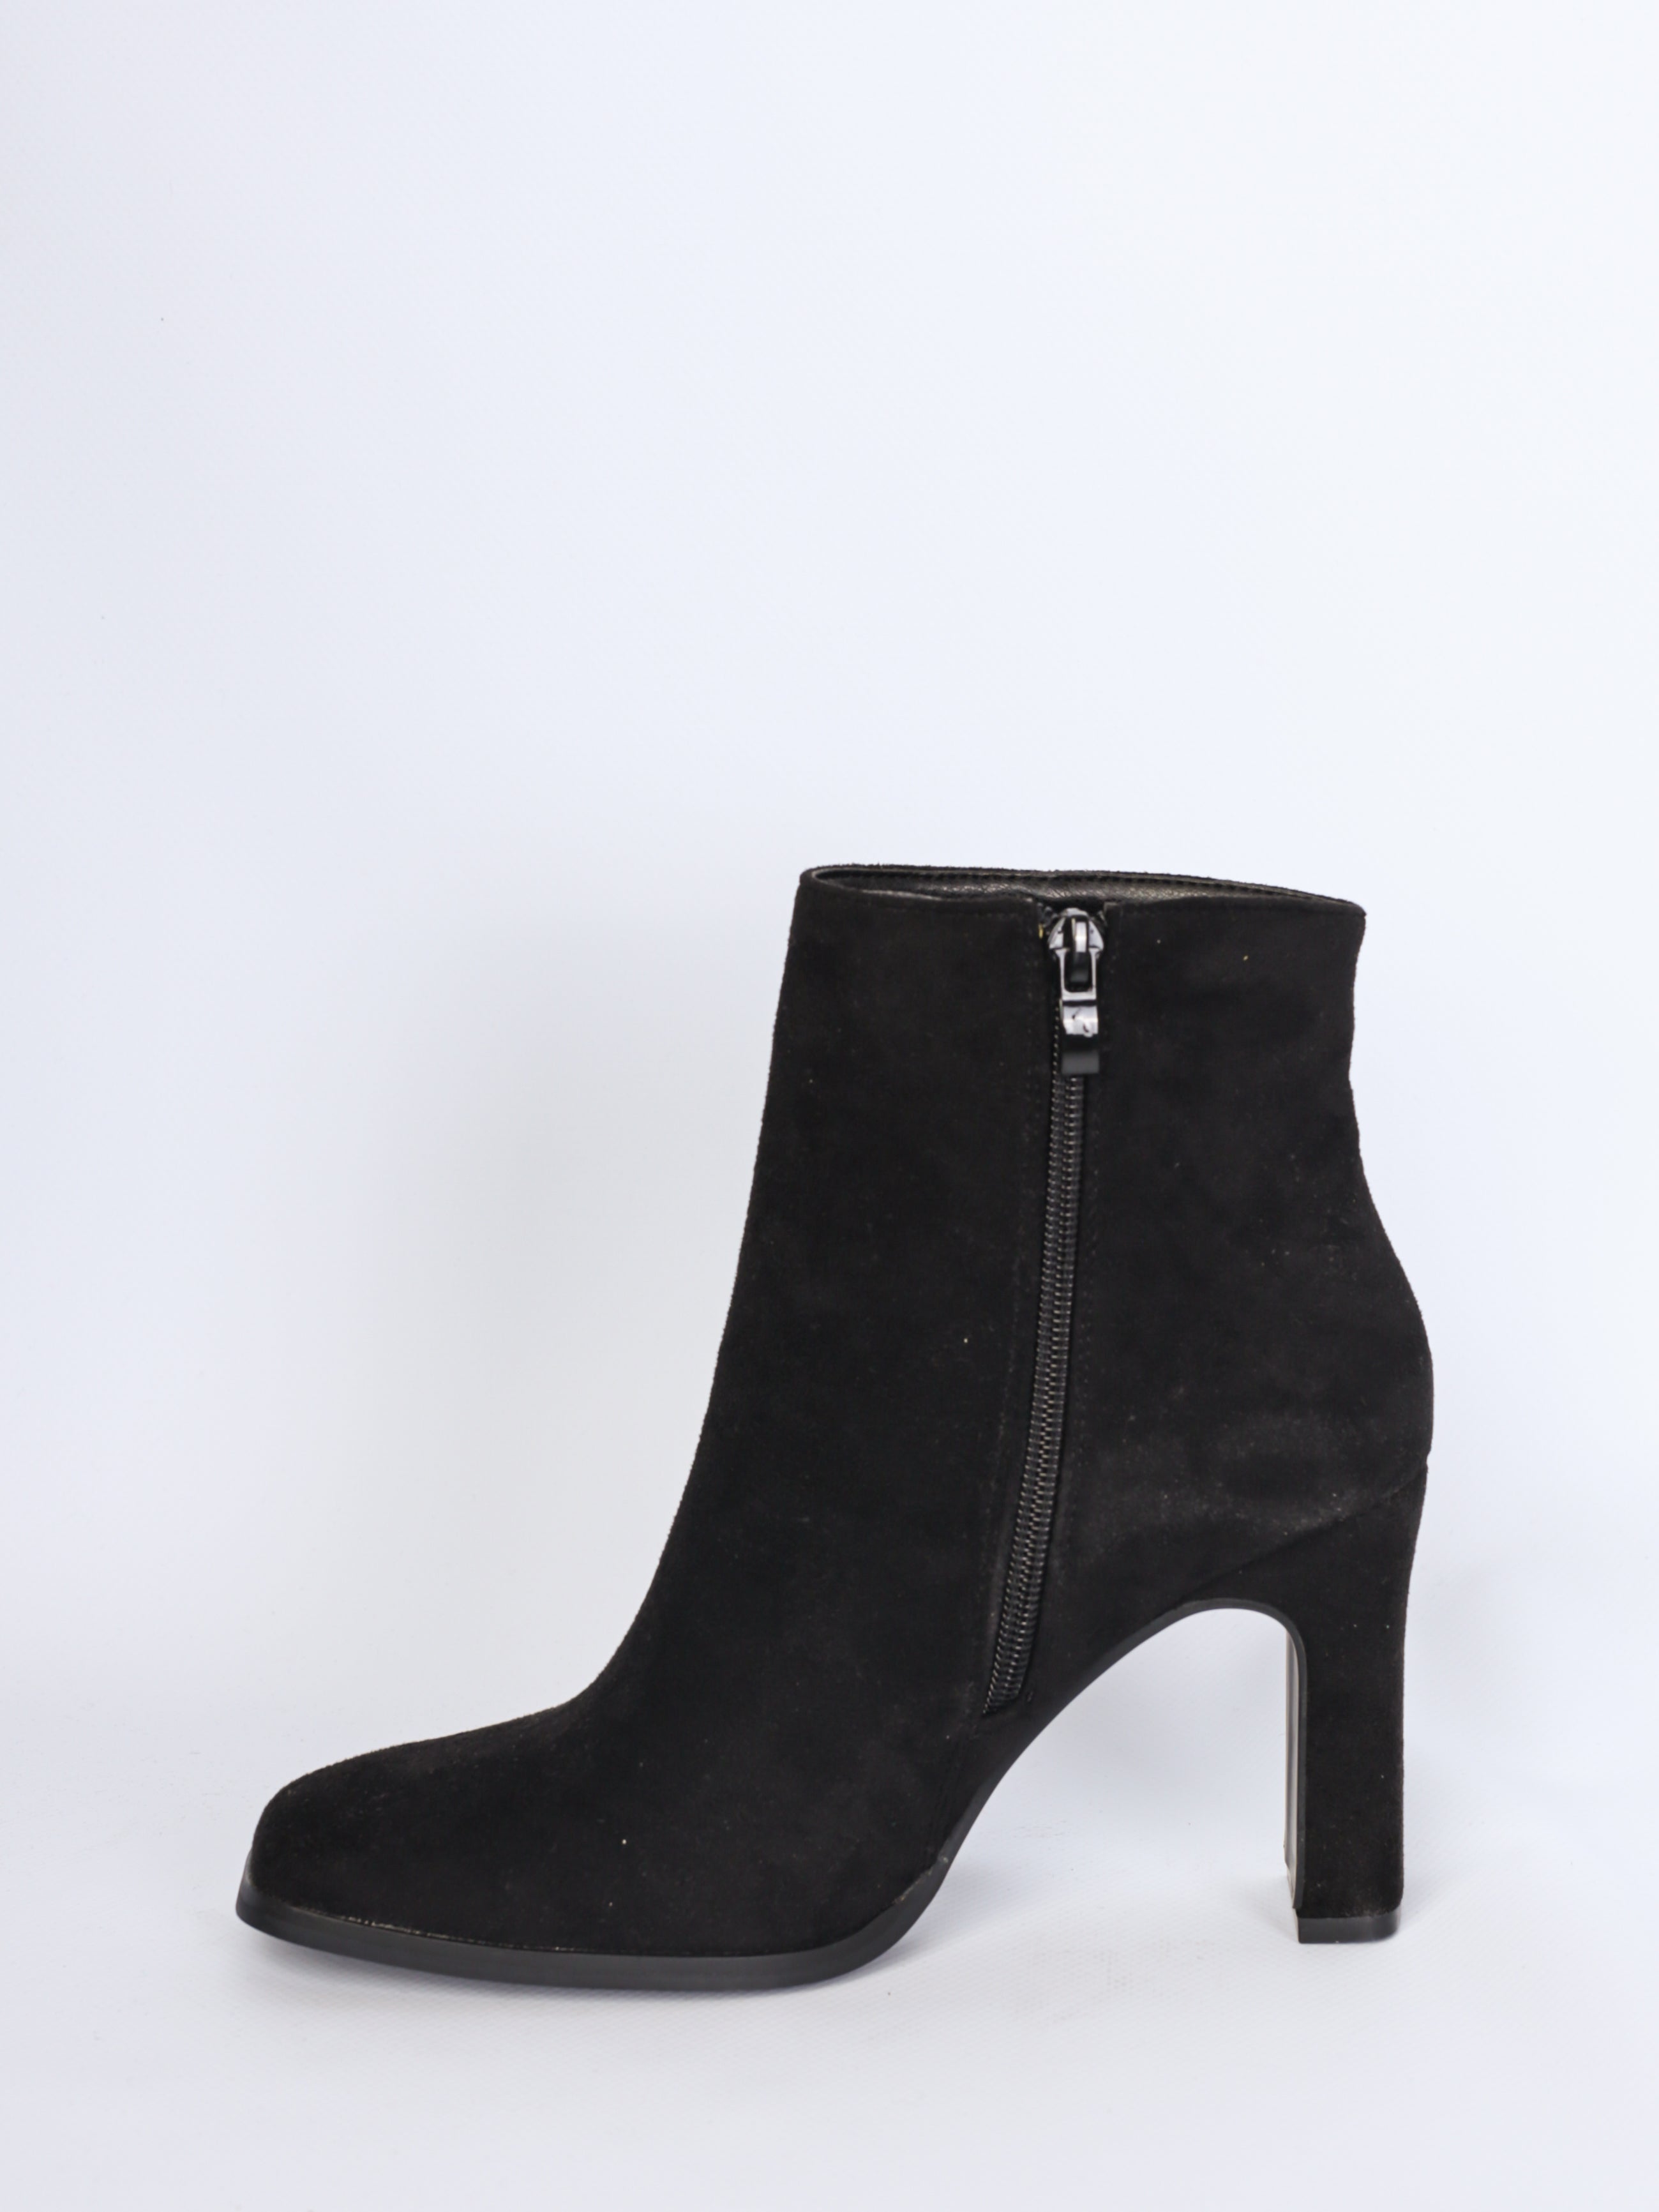 Black imitation suede high boots